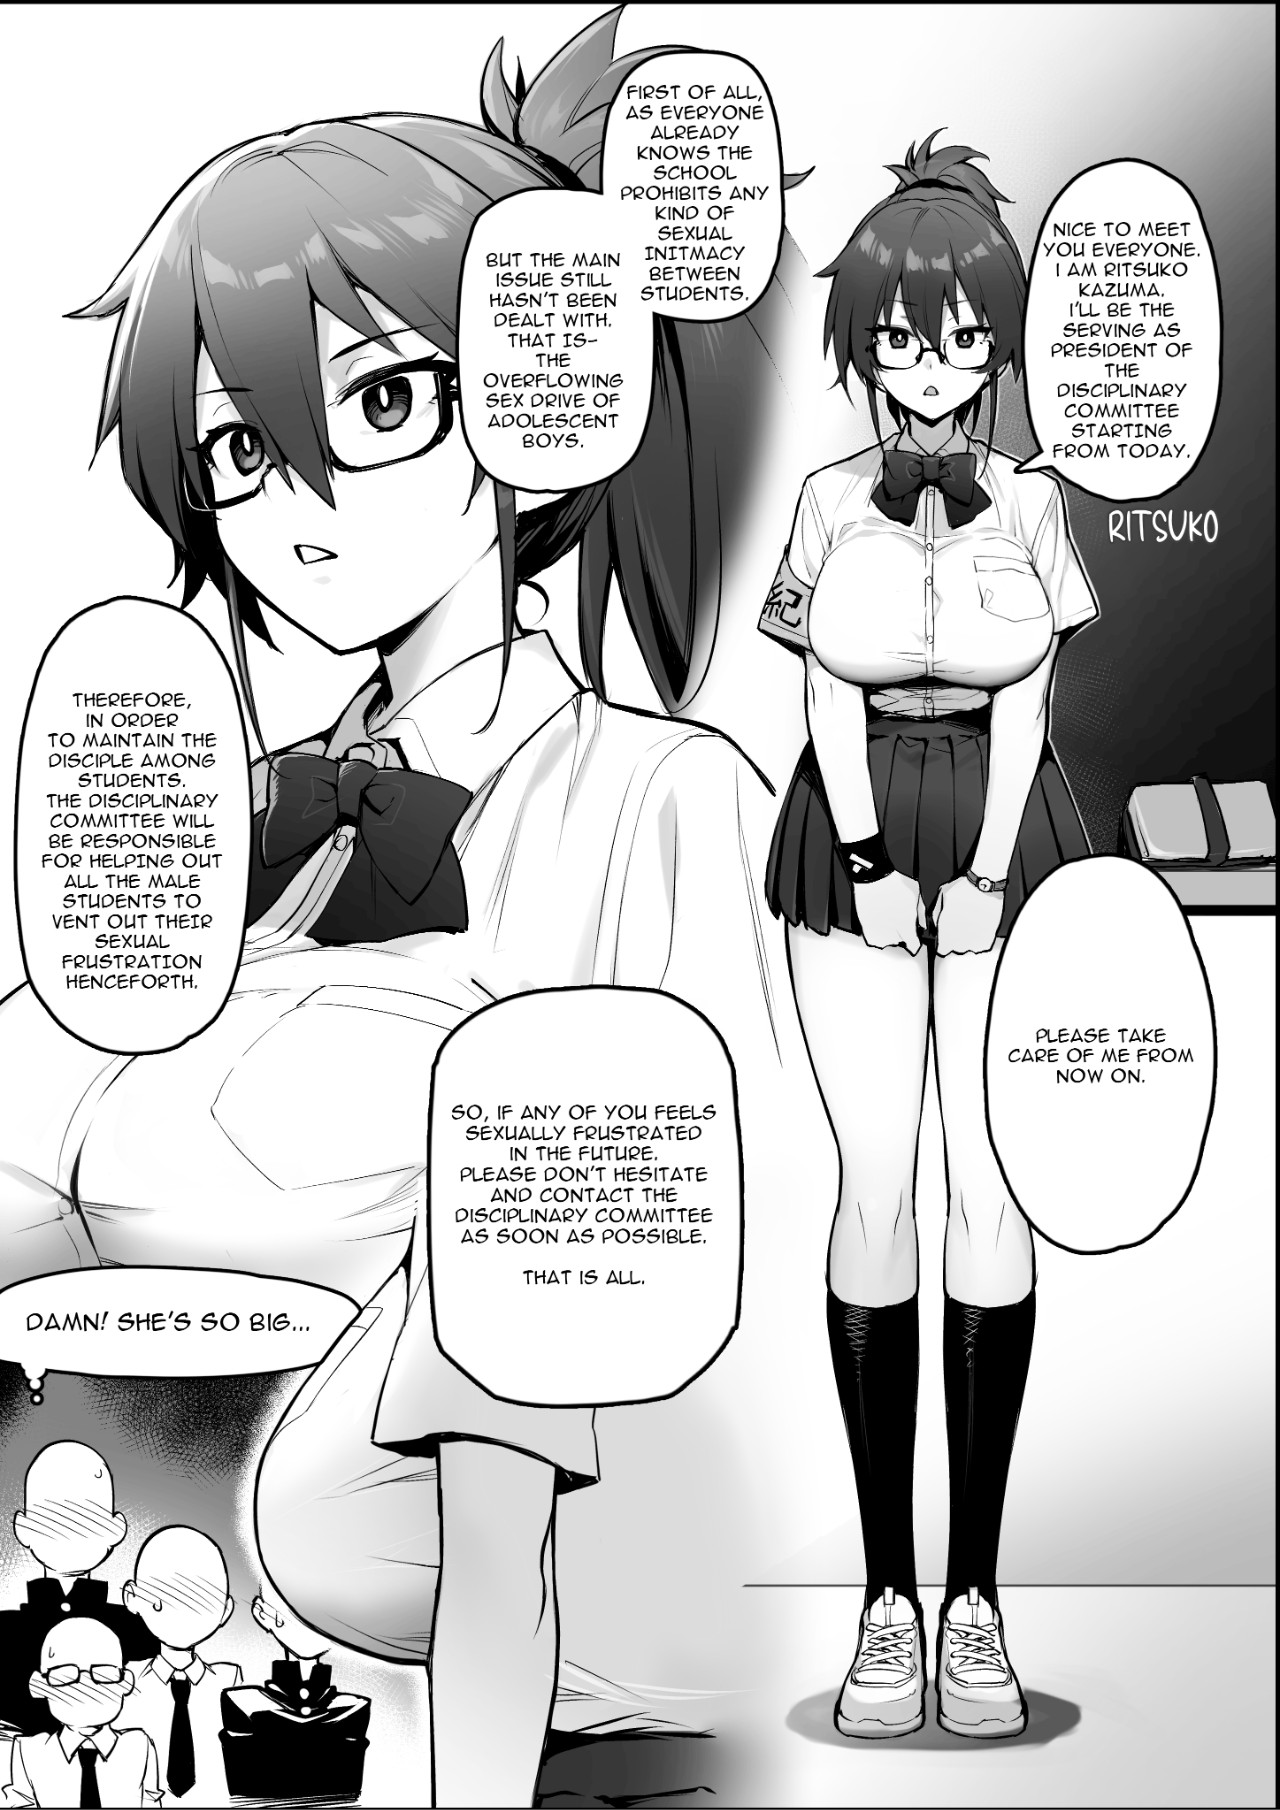 Rumor Has It That The New President Of The Disciplinary Committee Has a Huge Rack Porn Comic english 06